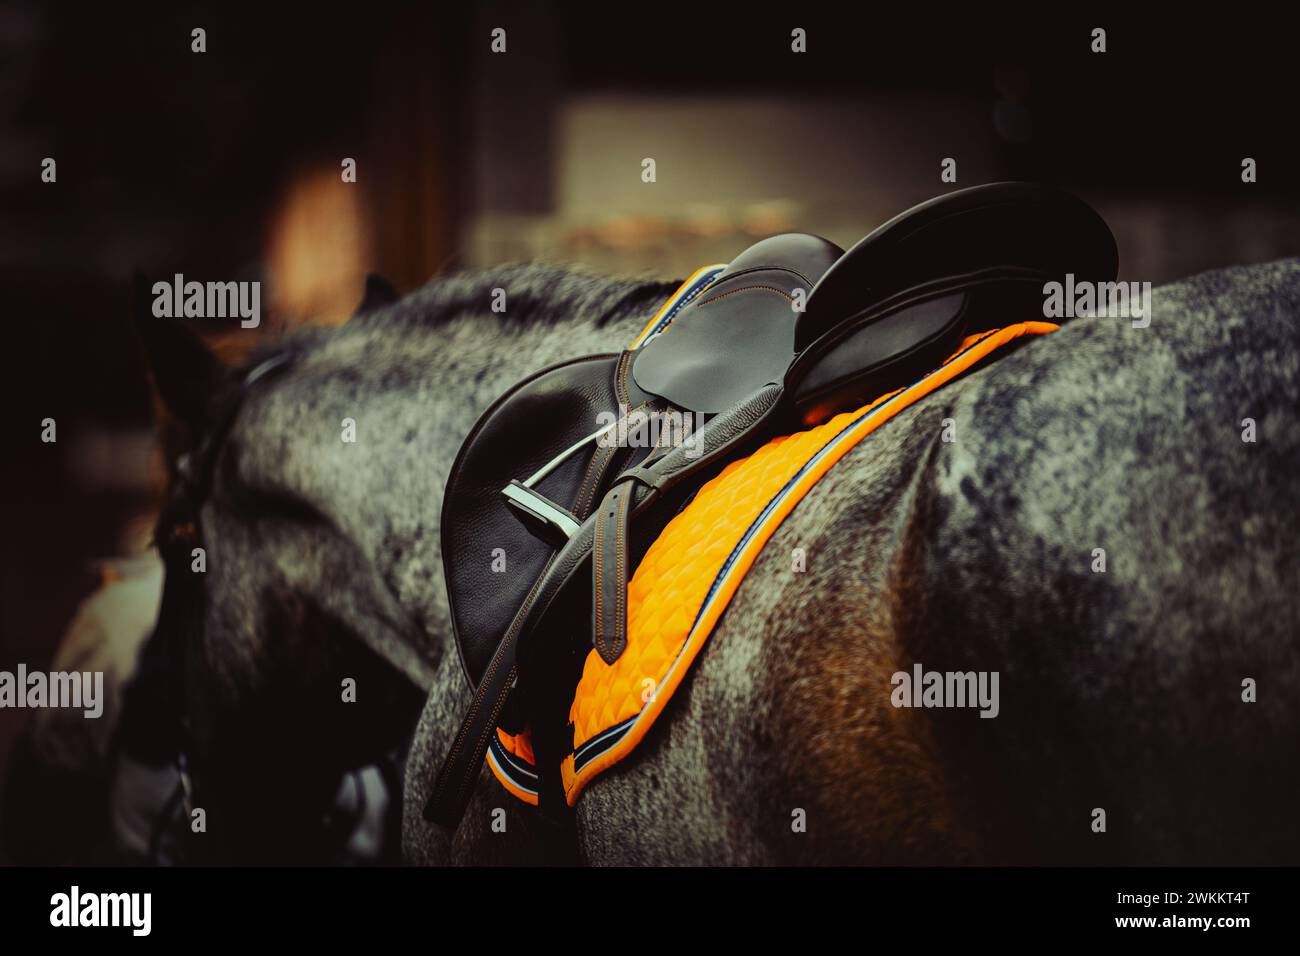 On a dark evening, a grey horse is seen wearing a leather saddle, with an orange saddlecloth. This is a scene from an equestrian sport or horse riding Stock Photo